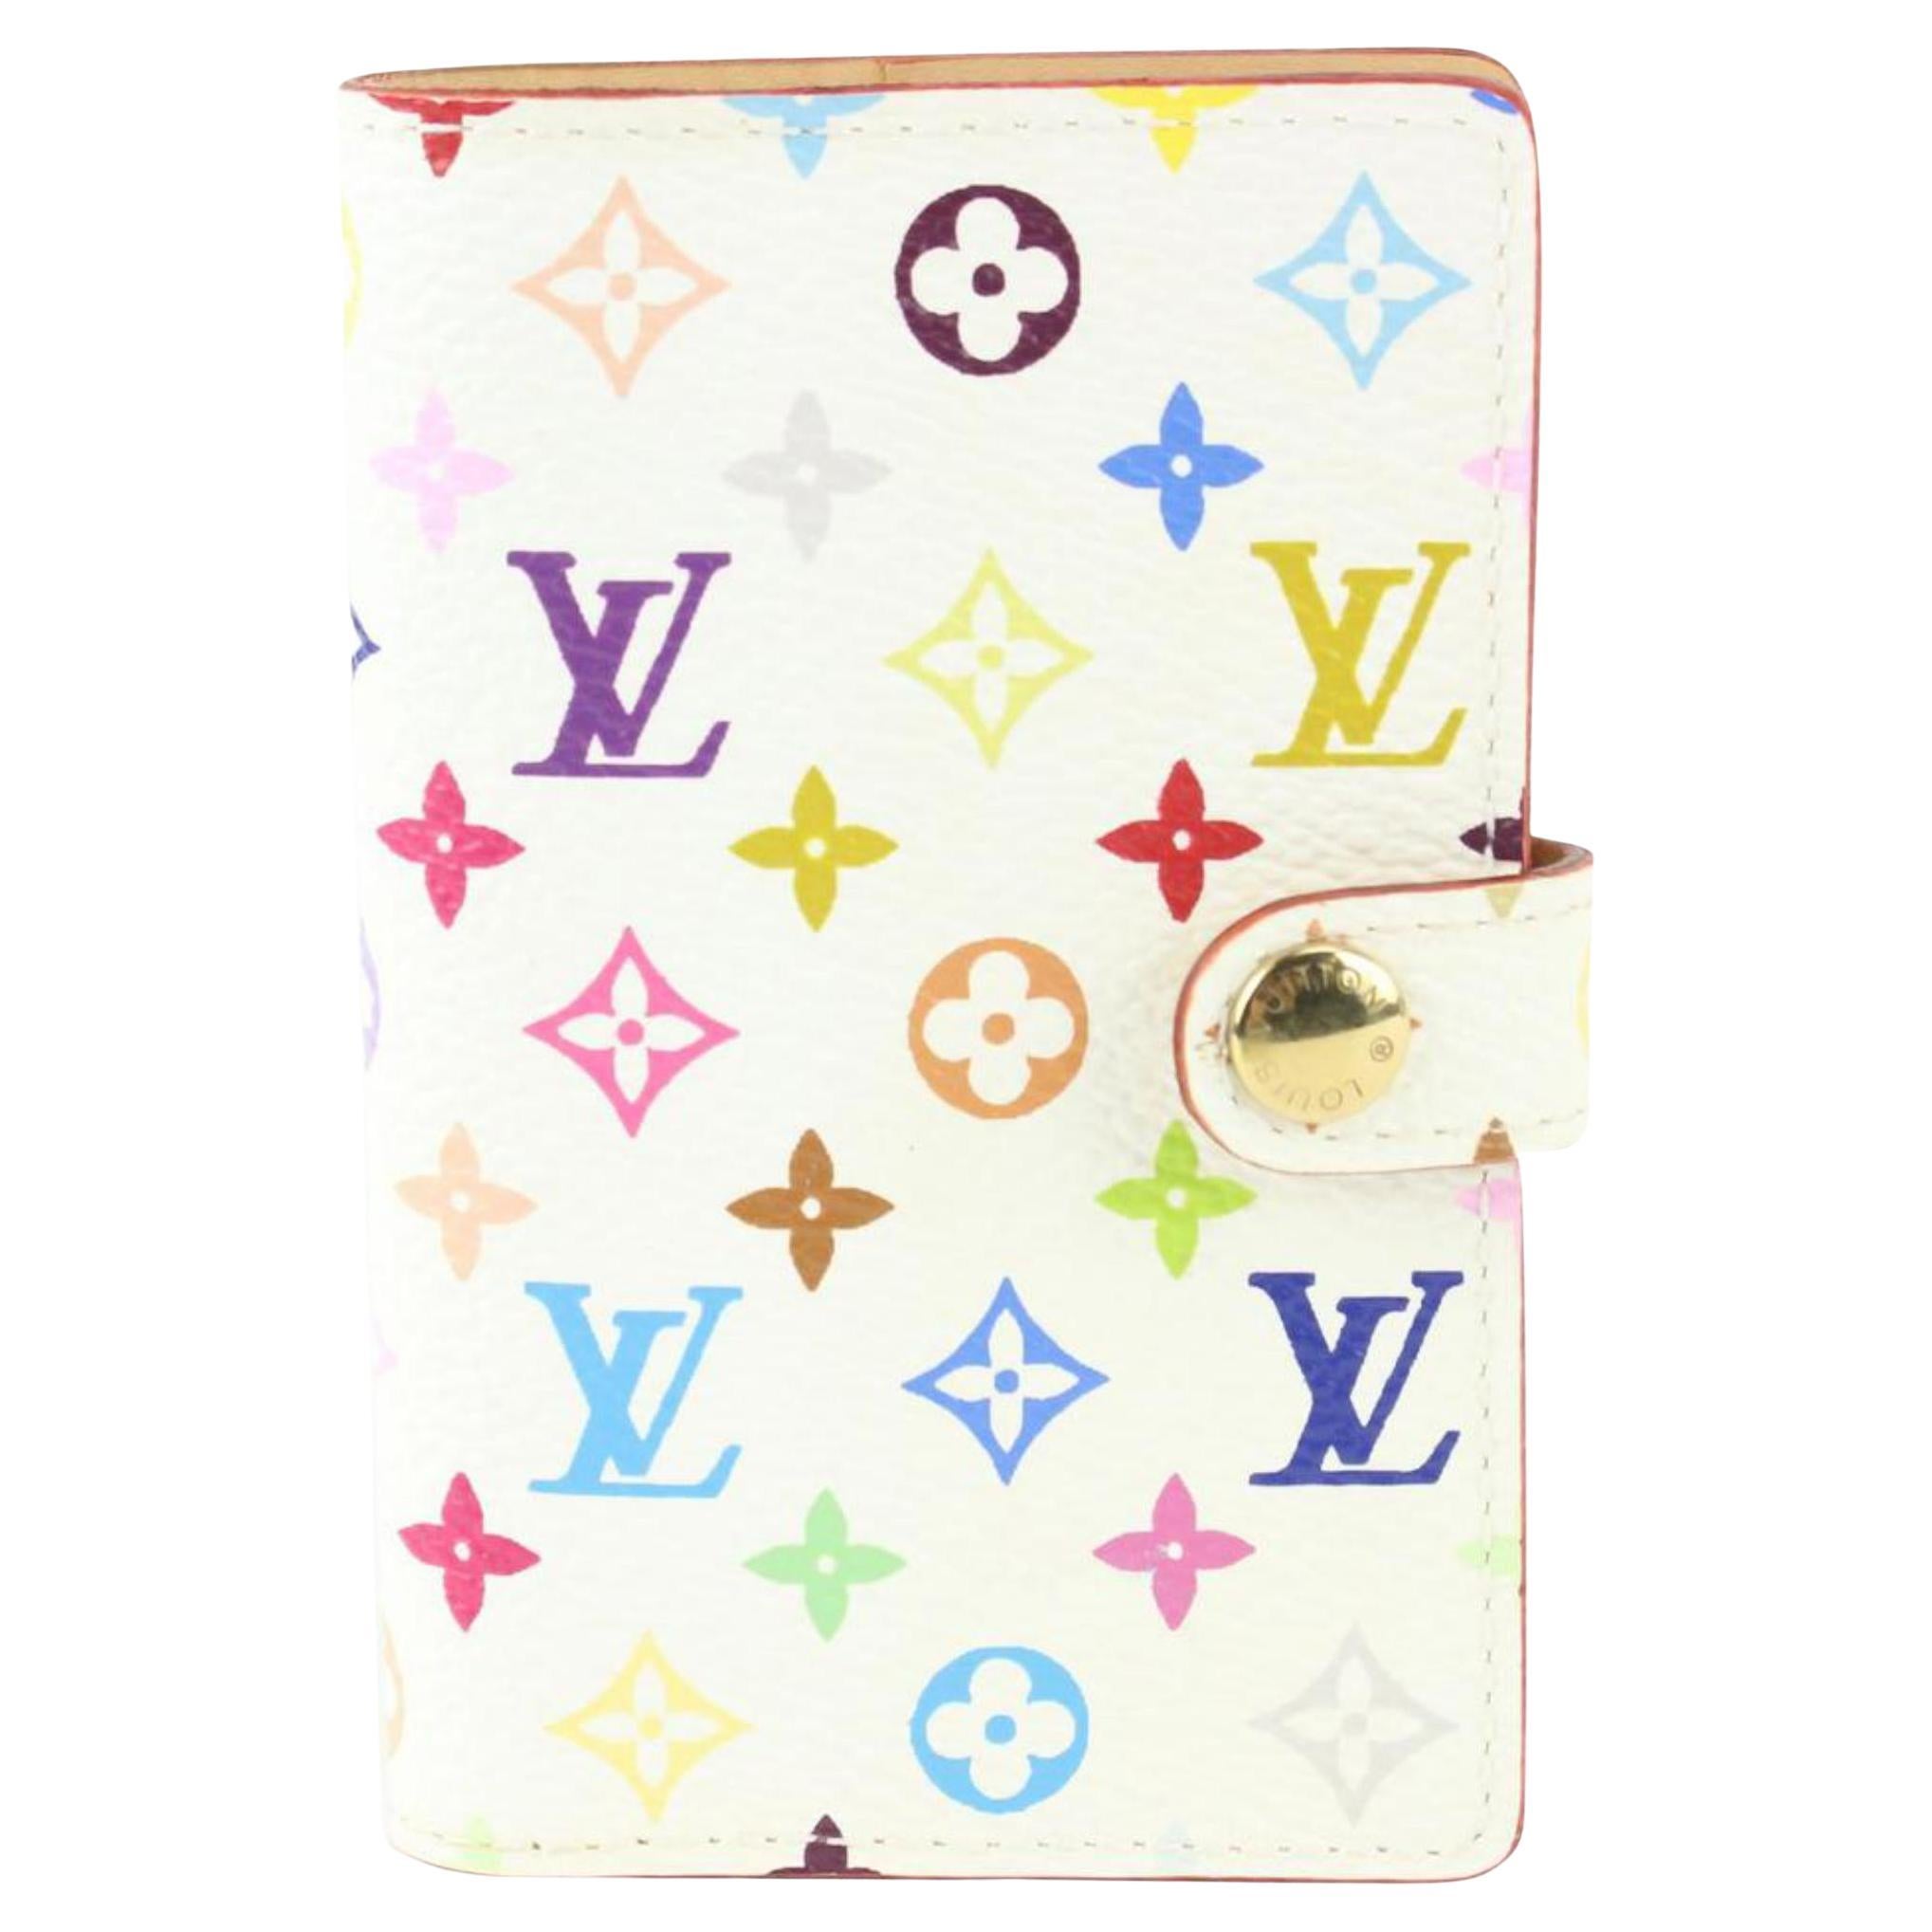 Louis Vuitton Monogram Toiletry Pouch 28 Unisex Travel Make Up Bag 69lk726s  For Sale at 1stDibs